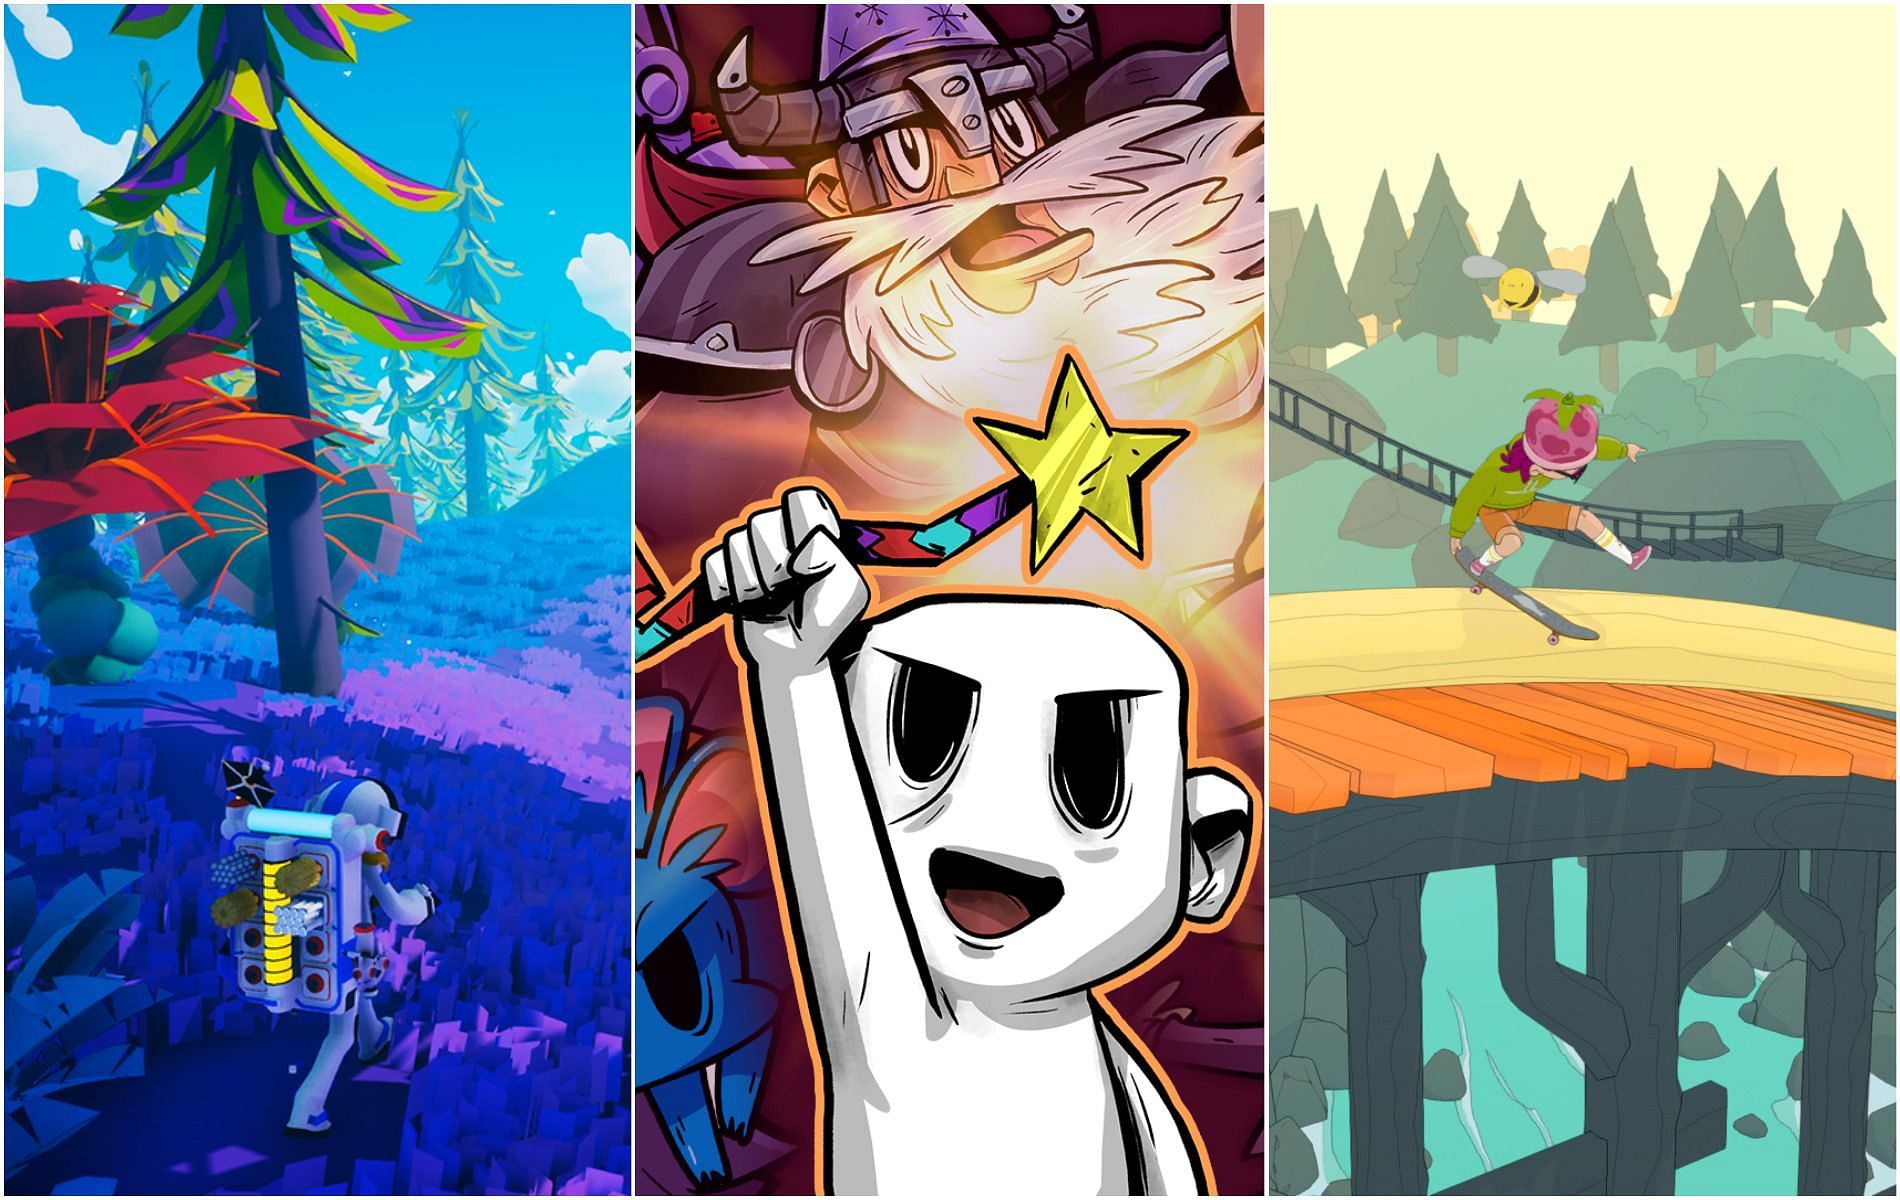 Some of the best indie games ever are coming to Switch